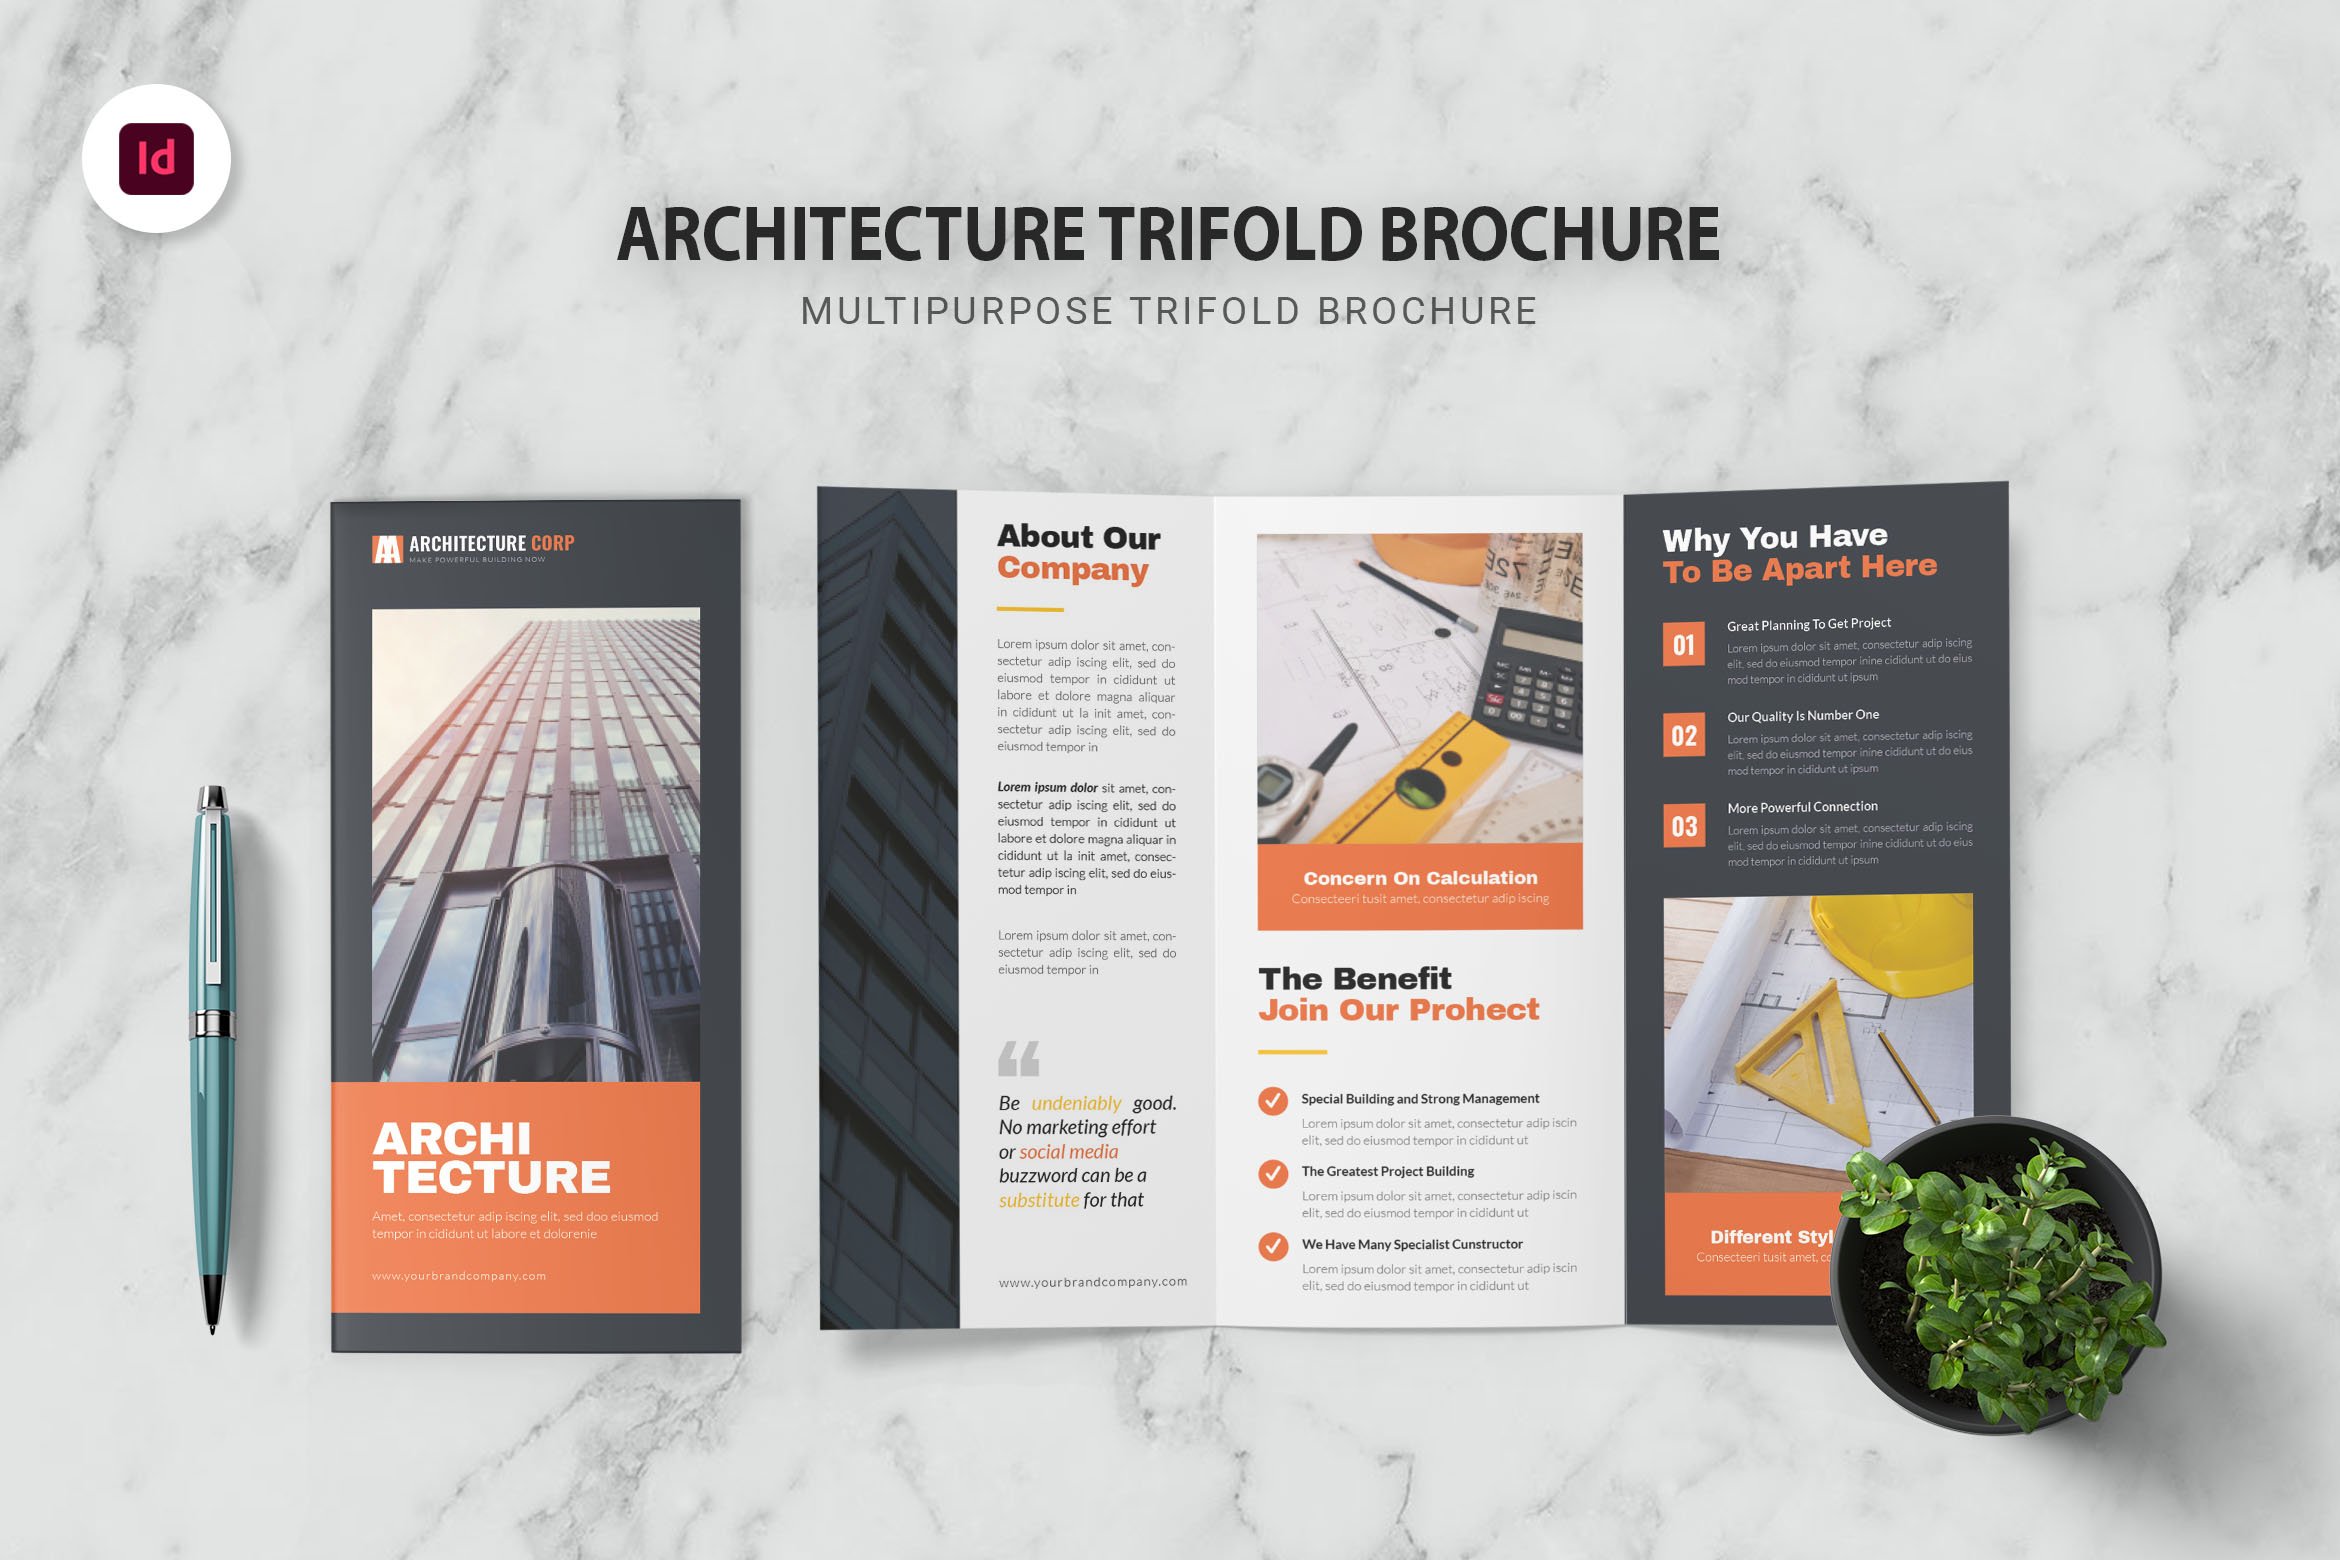 Architecture Trifold Brochure cover image.